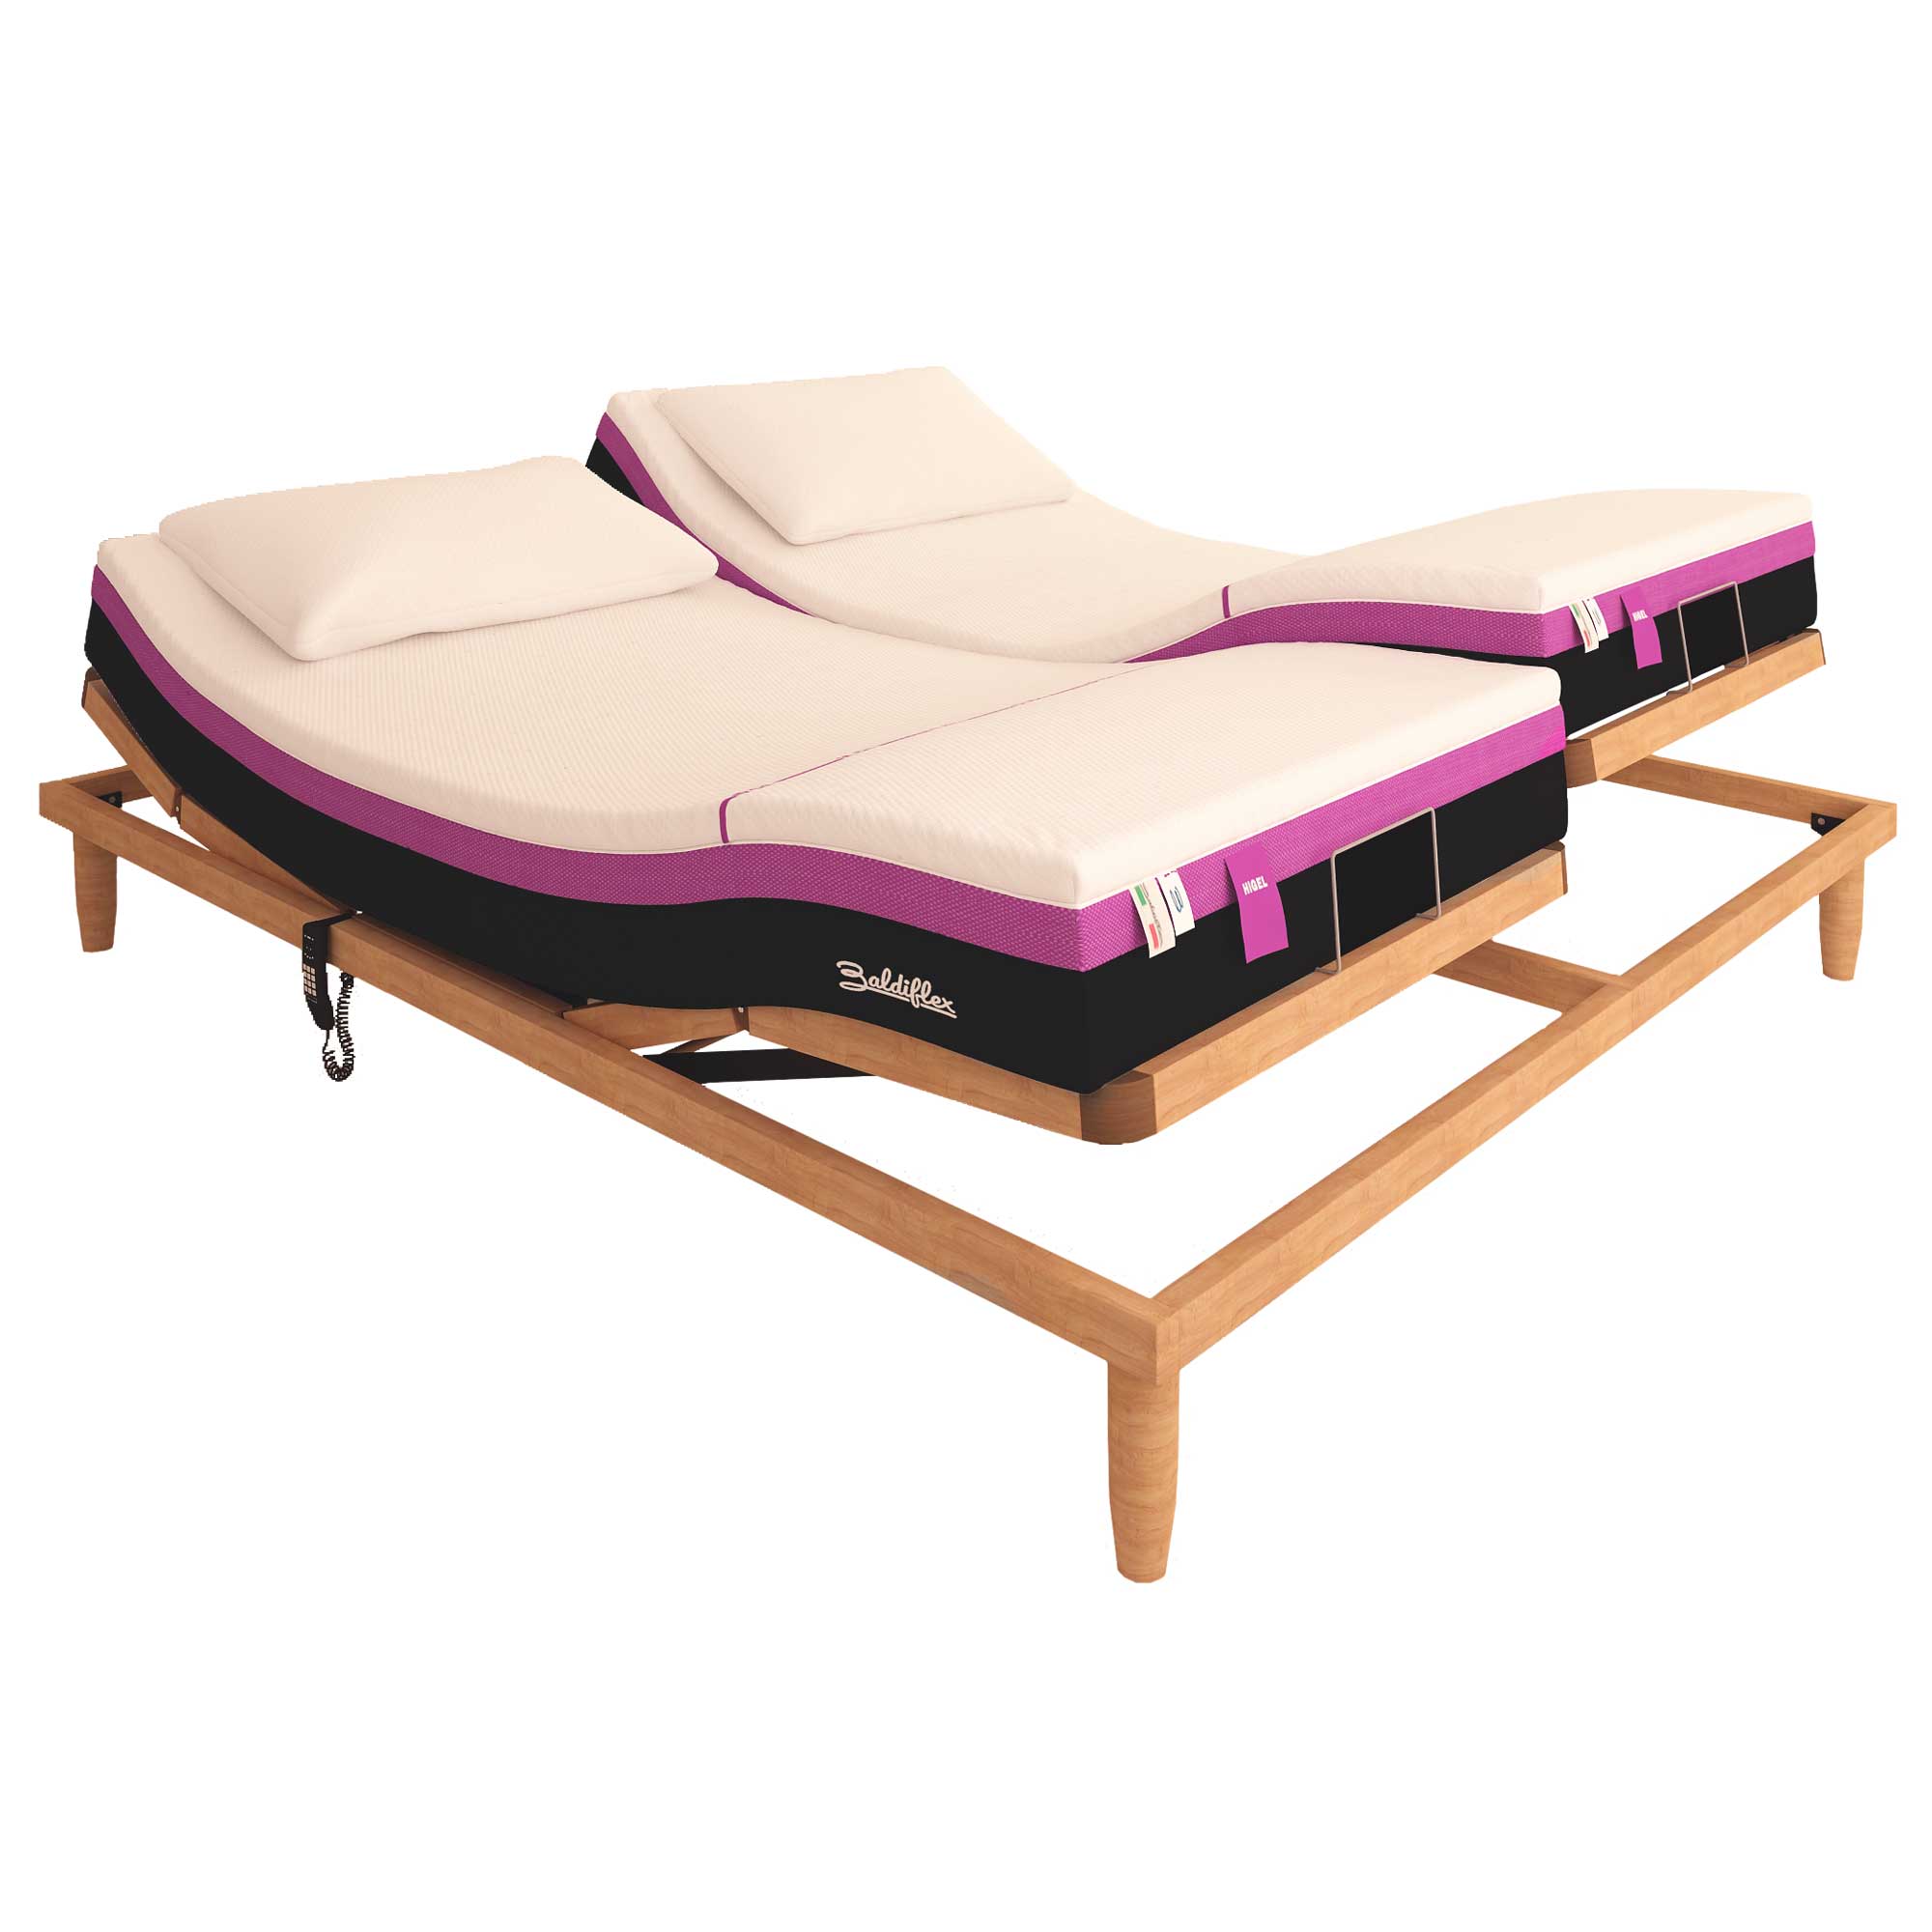 Wooden electric bed base with memory mattress and HiGel Baldiflex gel